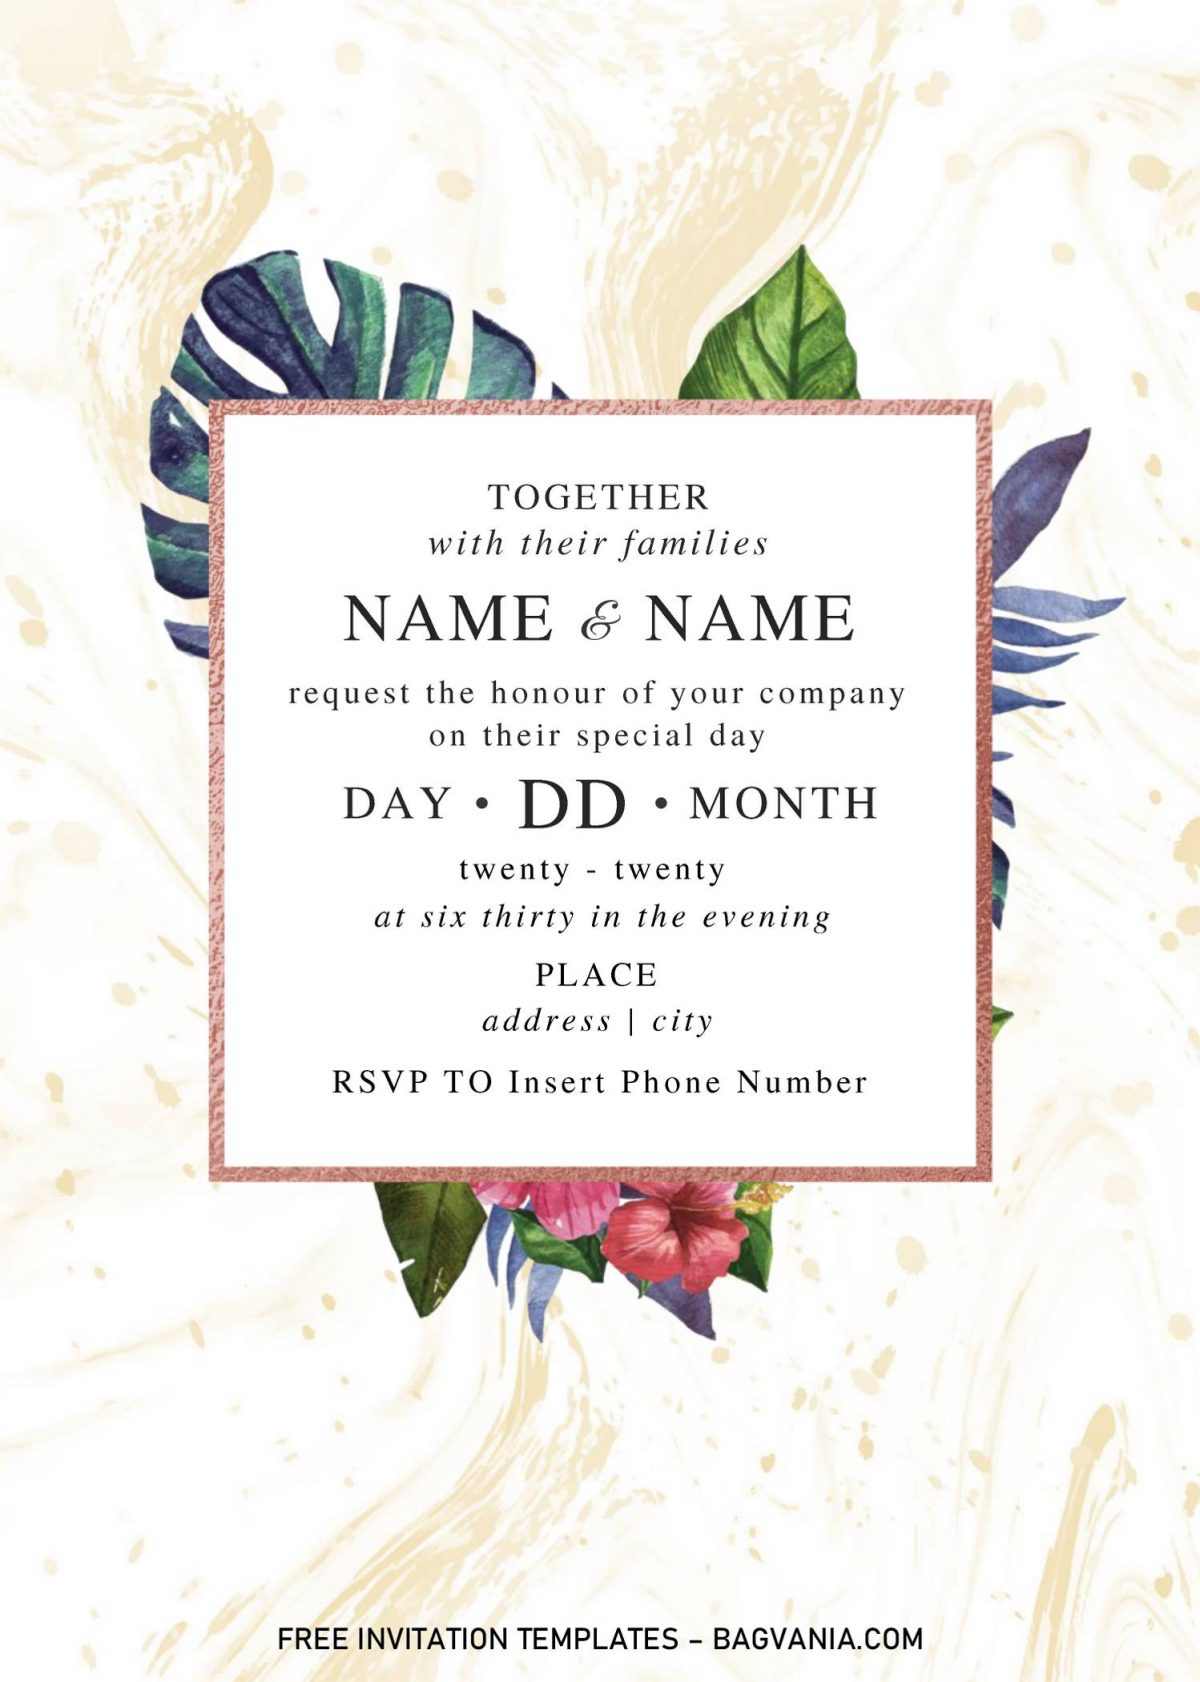 Festive Floral Wedding Invitation Templates - Editable With Microsoft Word and has gold marble background